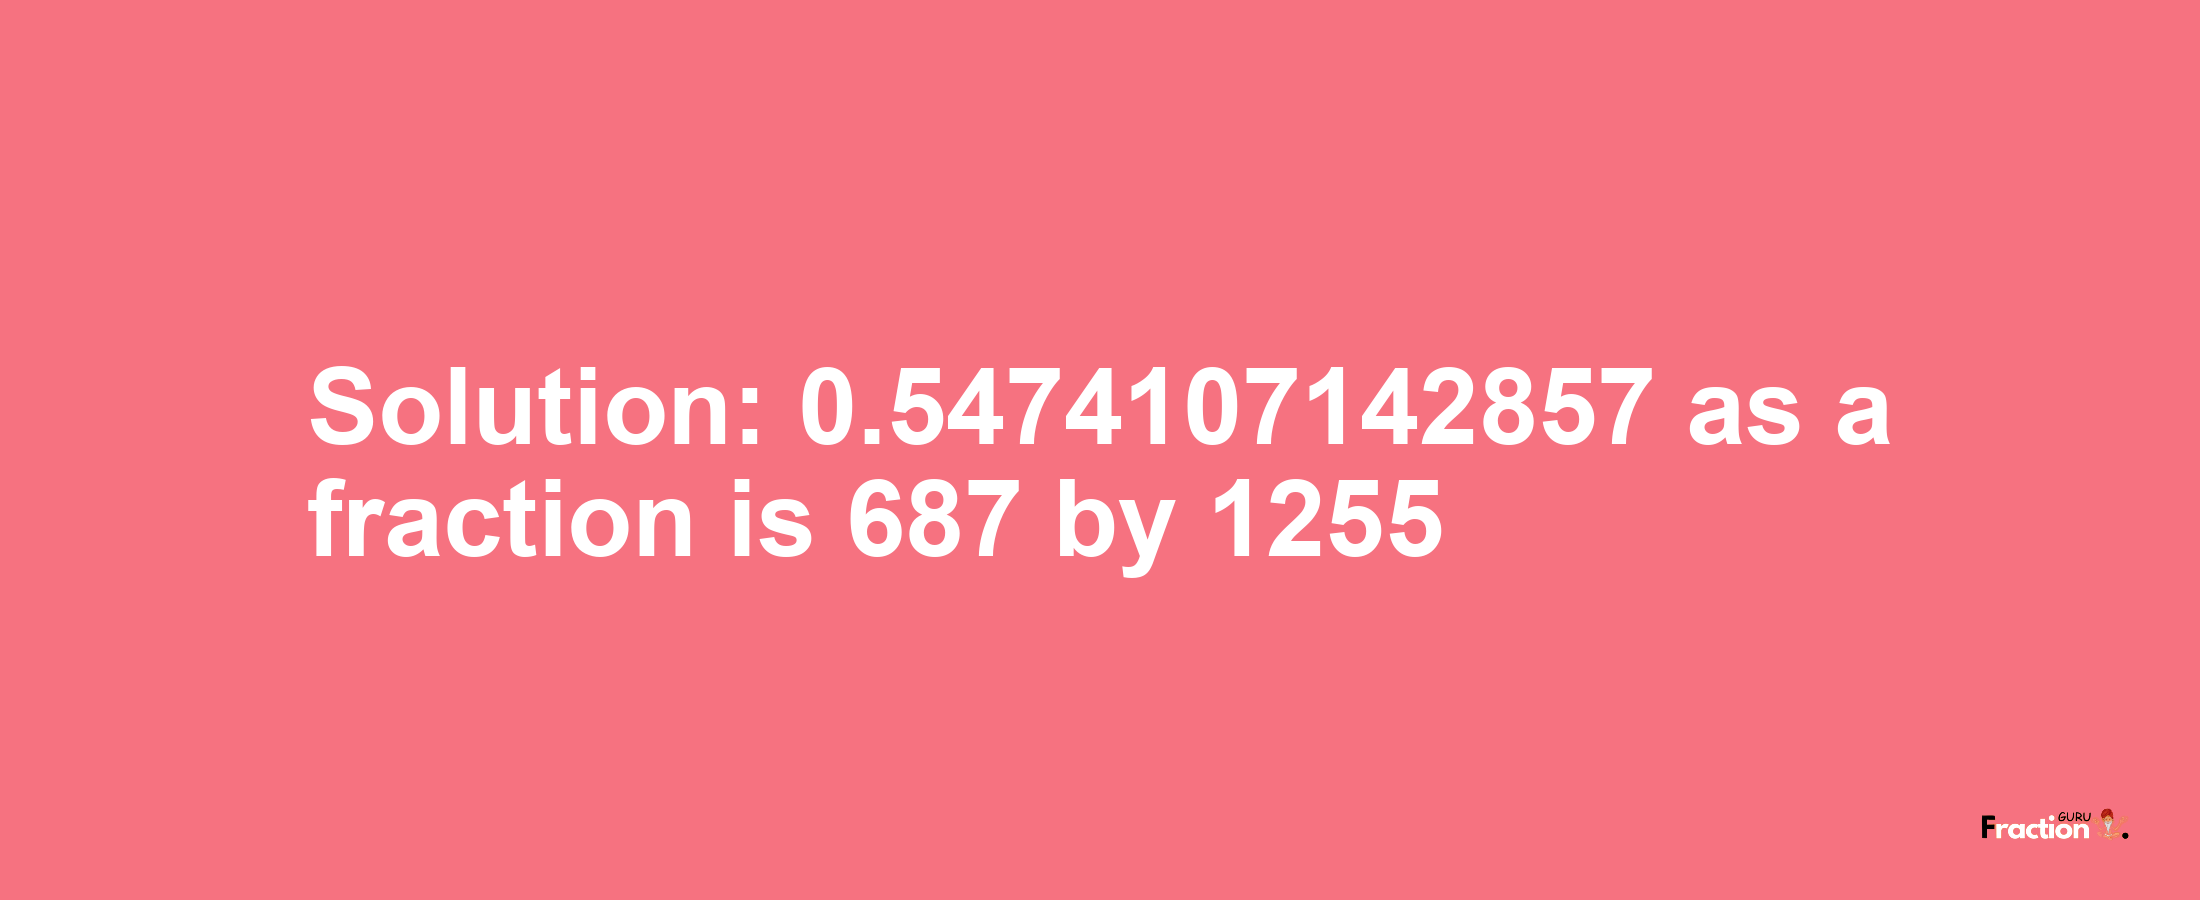 Solution:0.5474107142857 as a fraction is 687/1255